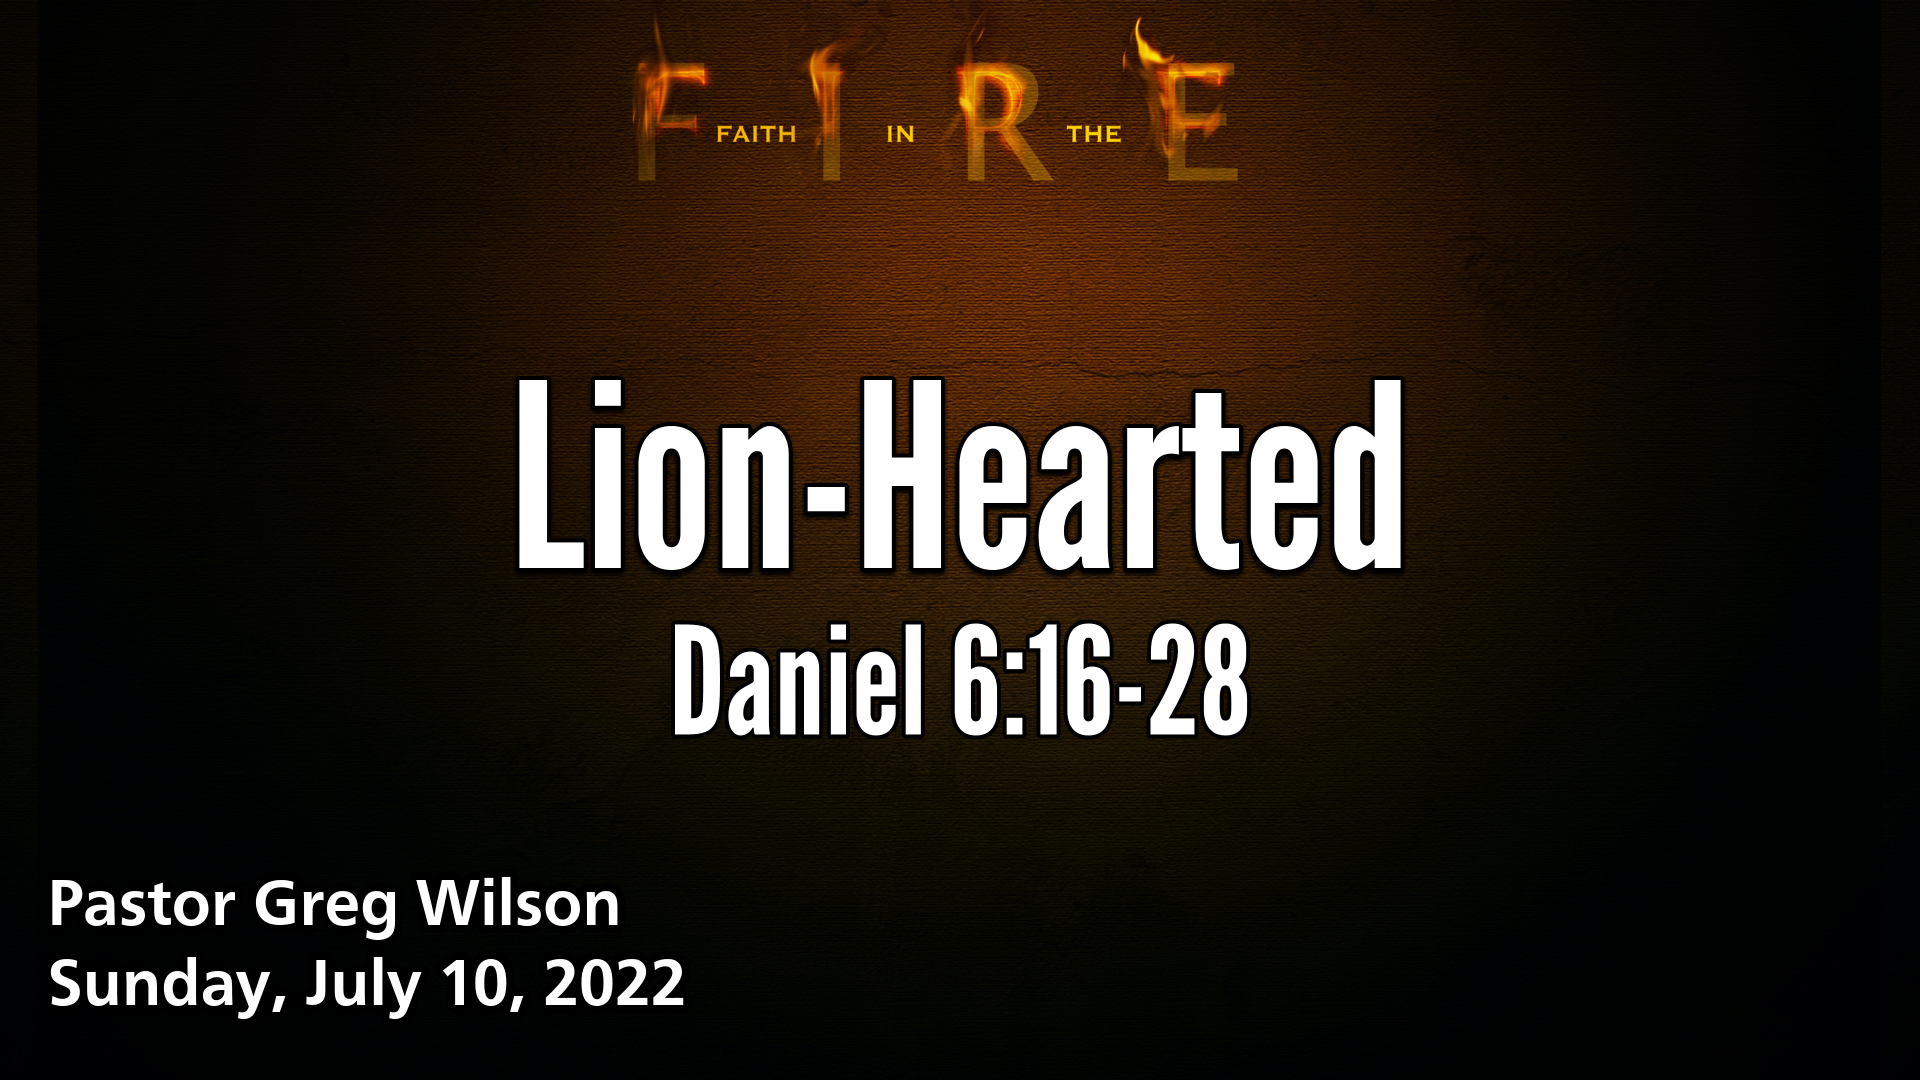 "Lion-Hearted"